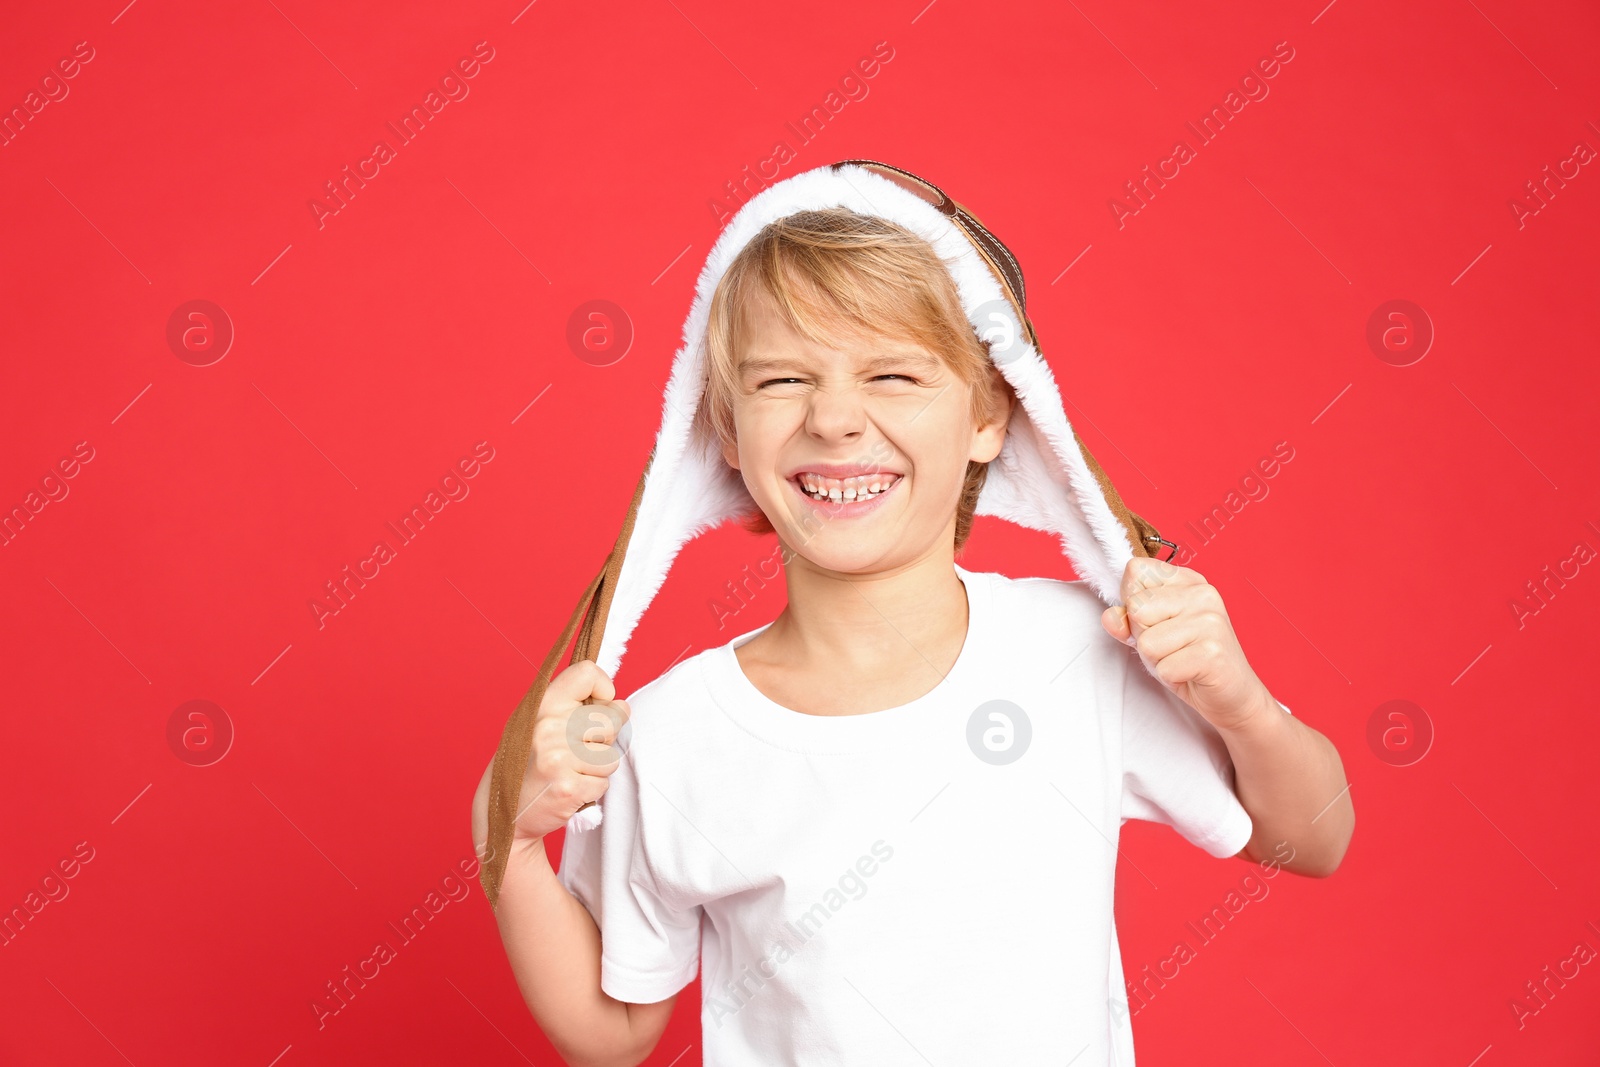 Photo of Happy little boy wearing hat on red background